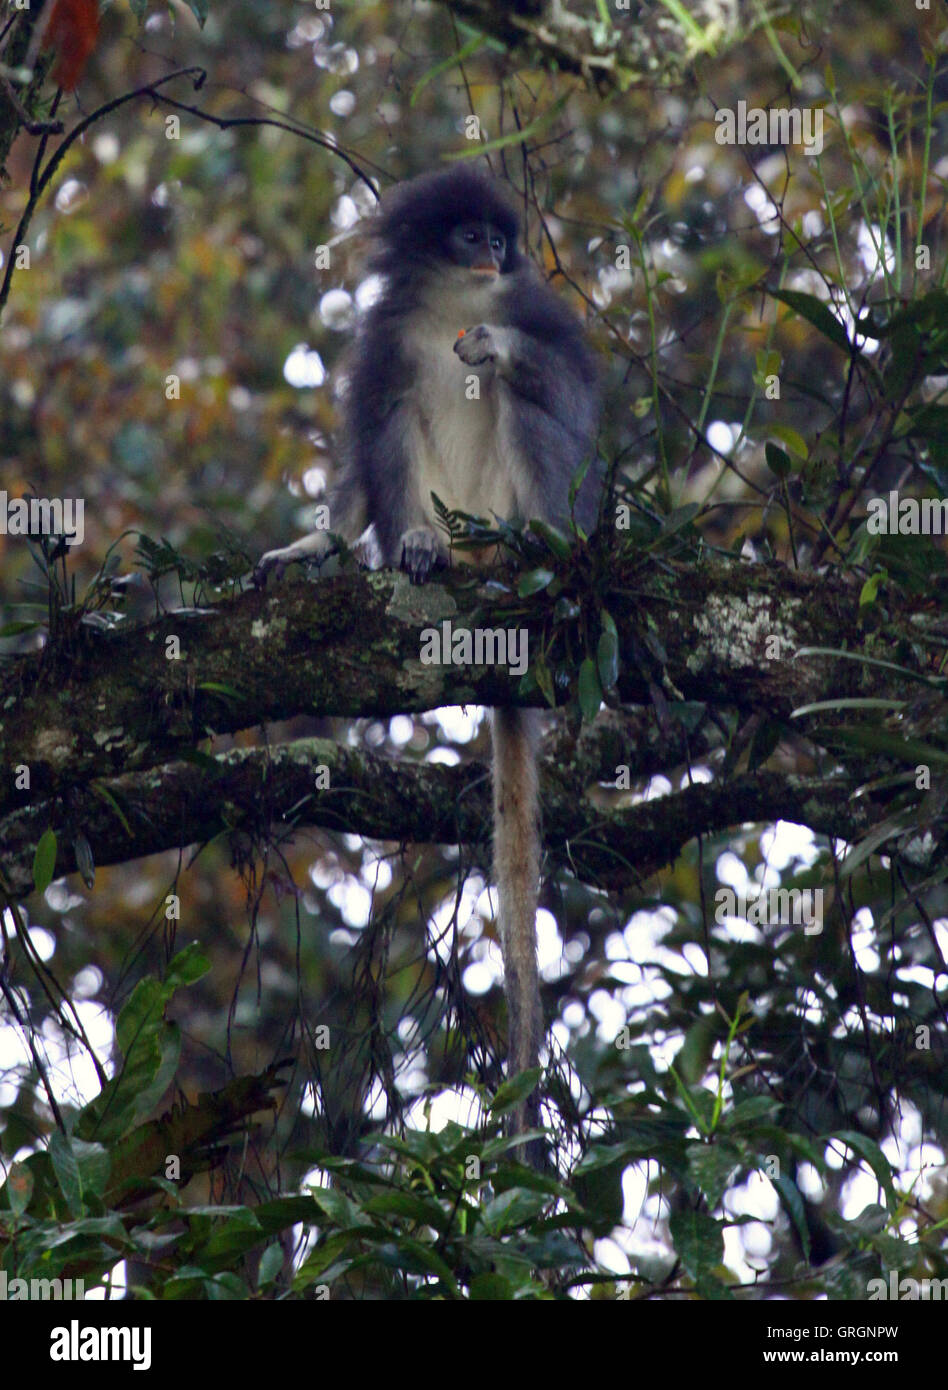 Jakarta, Jakarta, Indonesia. 7th Sep, 2016. The release of primates Javan (Presbytis comata) back to their natural habitat in the forest area of western Java. Surili returned a species endemic to West Java and some parts of Central Java is an animal that is rare and need to be protected and preserved its existence .Surili known as primates sensitive and shy has the shape and body size ranges between 42-61 cm. Proportionally tail Surili generally longer than the body length ranging from 50-85 cm. Surili adult body weight on average between 5-8 kg and have a body color of gray on the back Stock Photo